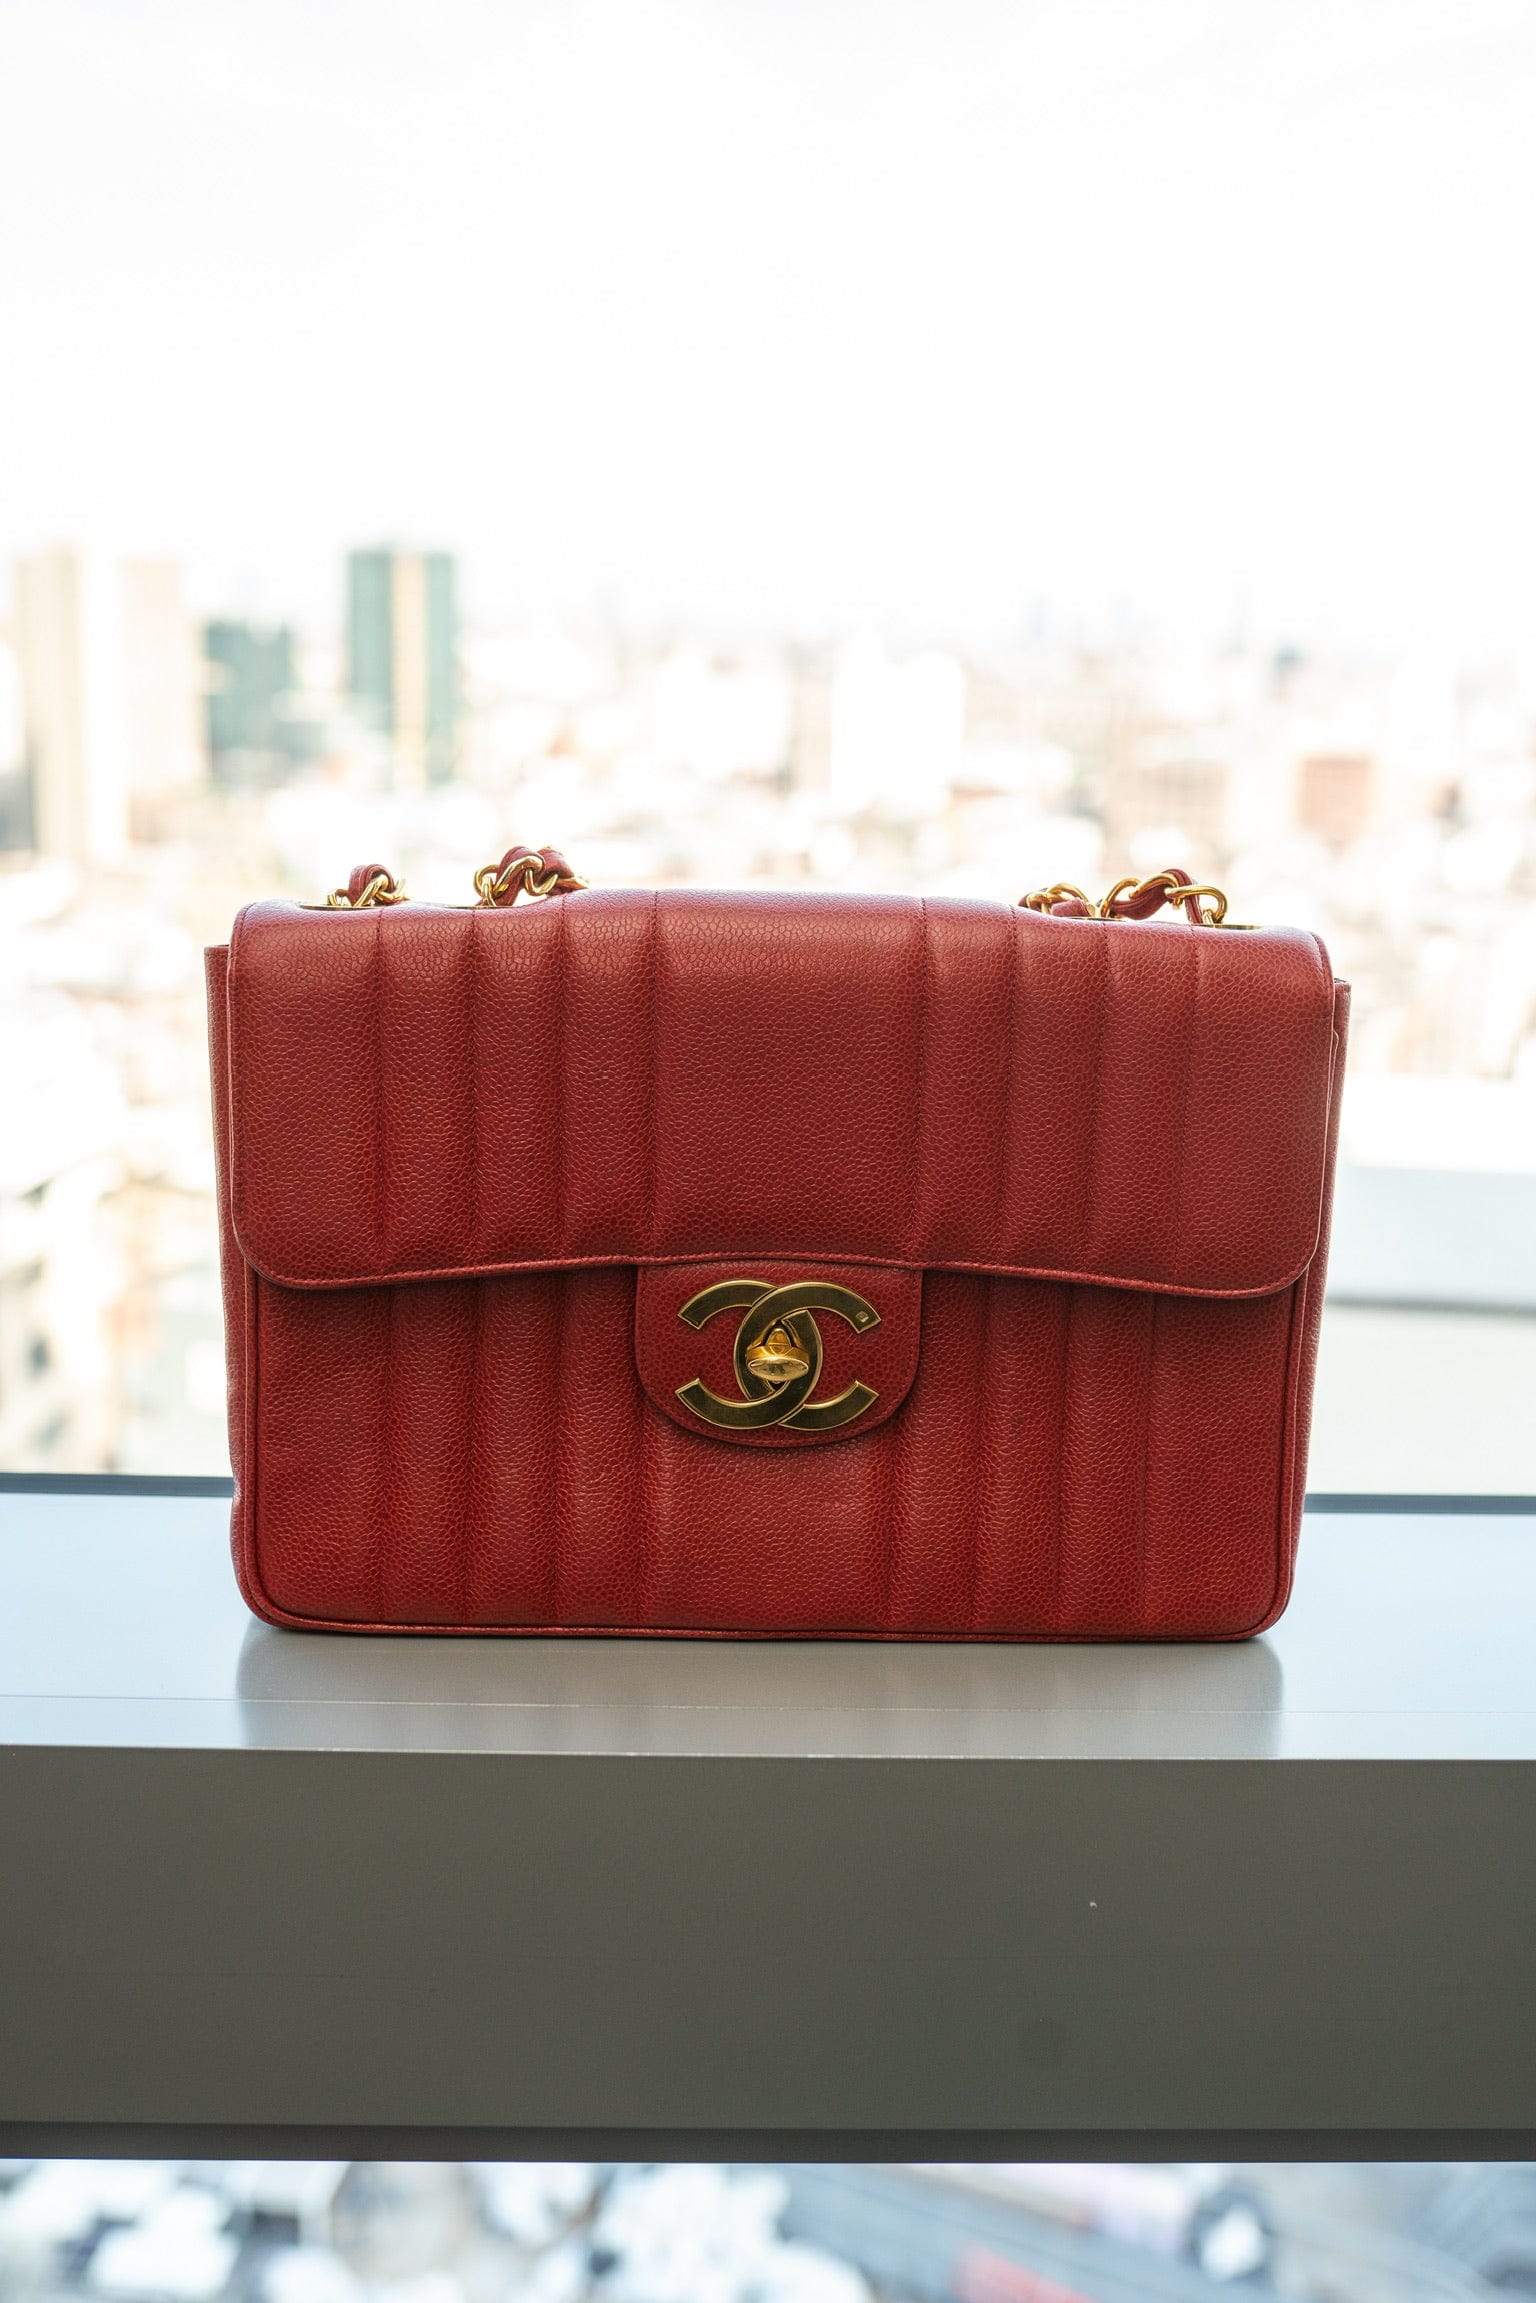 Chanel Mademoiselle Caviar Chain Shoulder Bag Red PXL1786